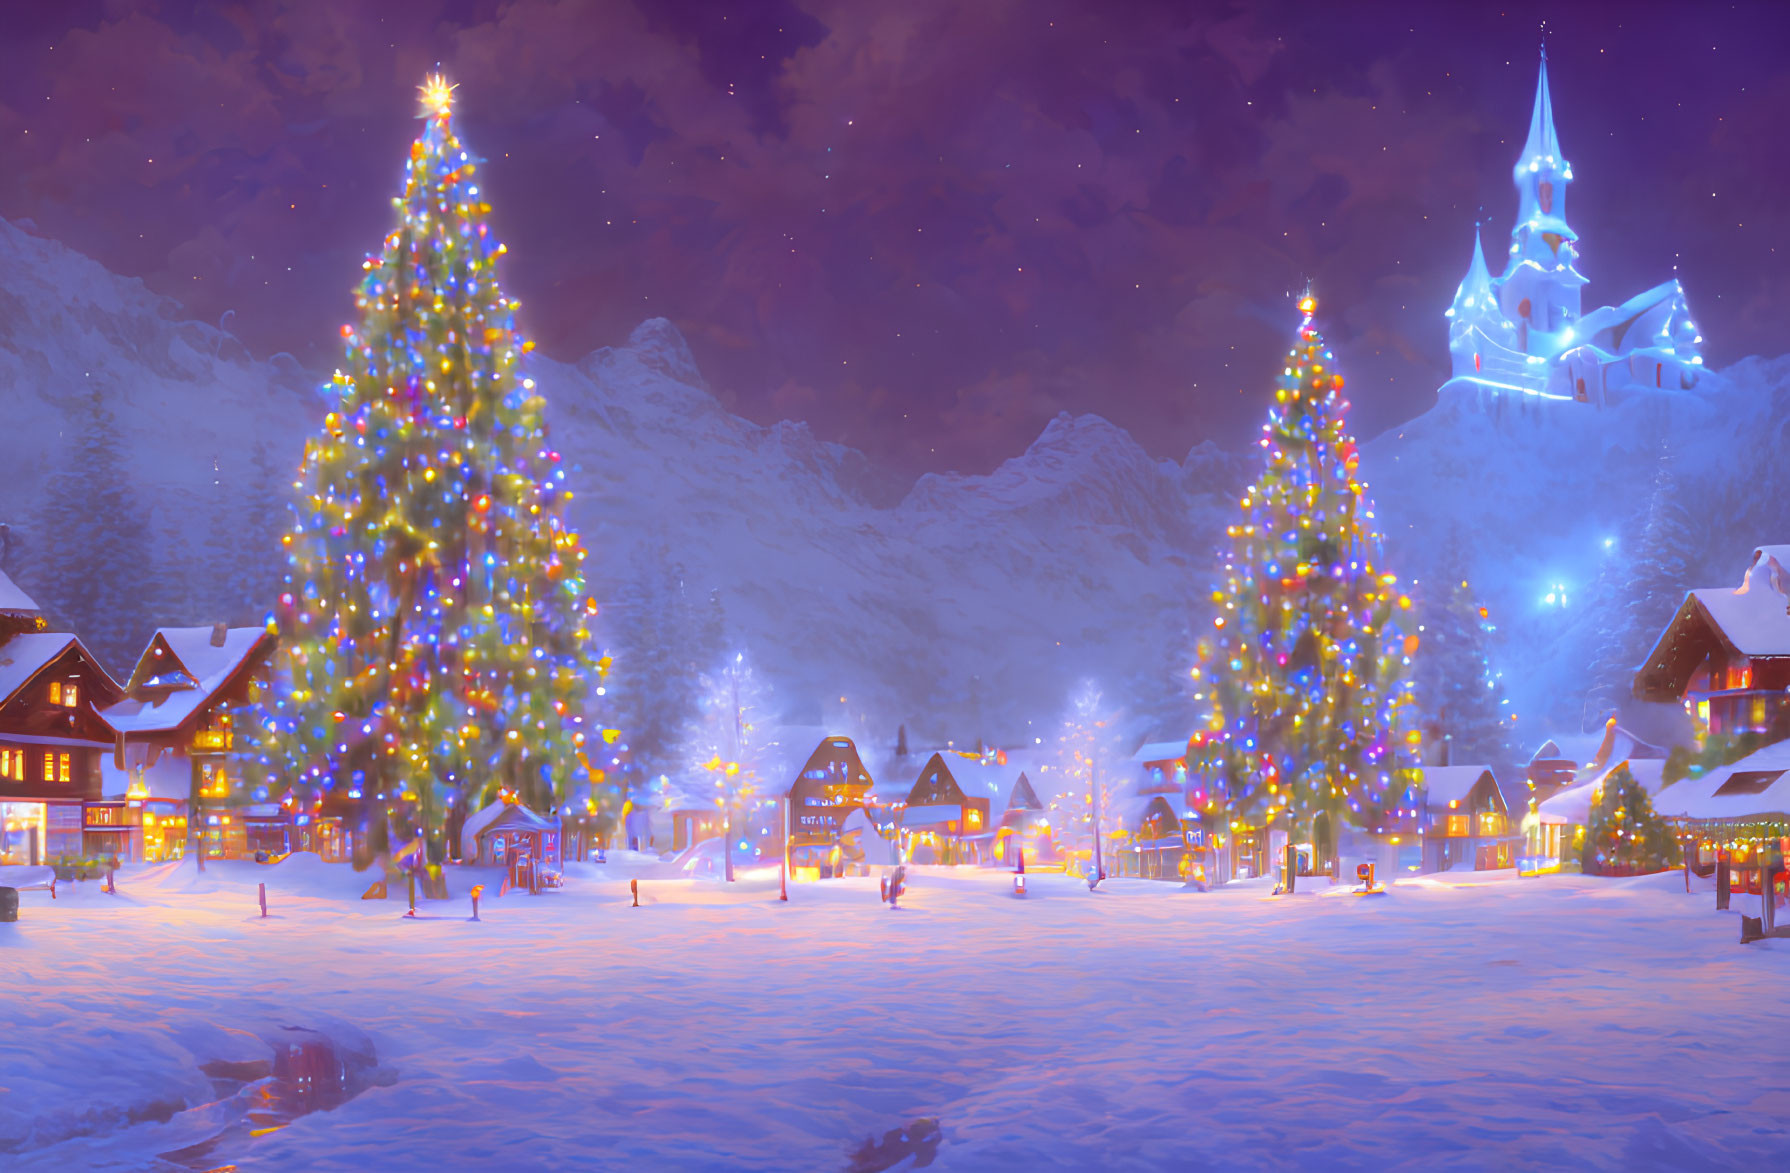 Snowy village at dusk with Christmas trees, lights, and castle under starry sky